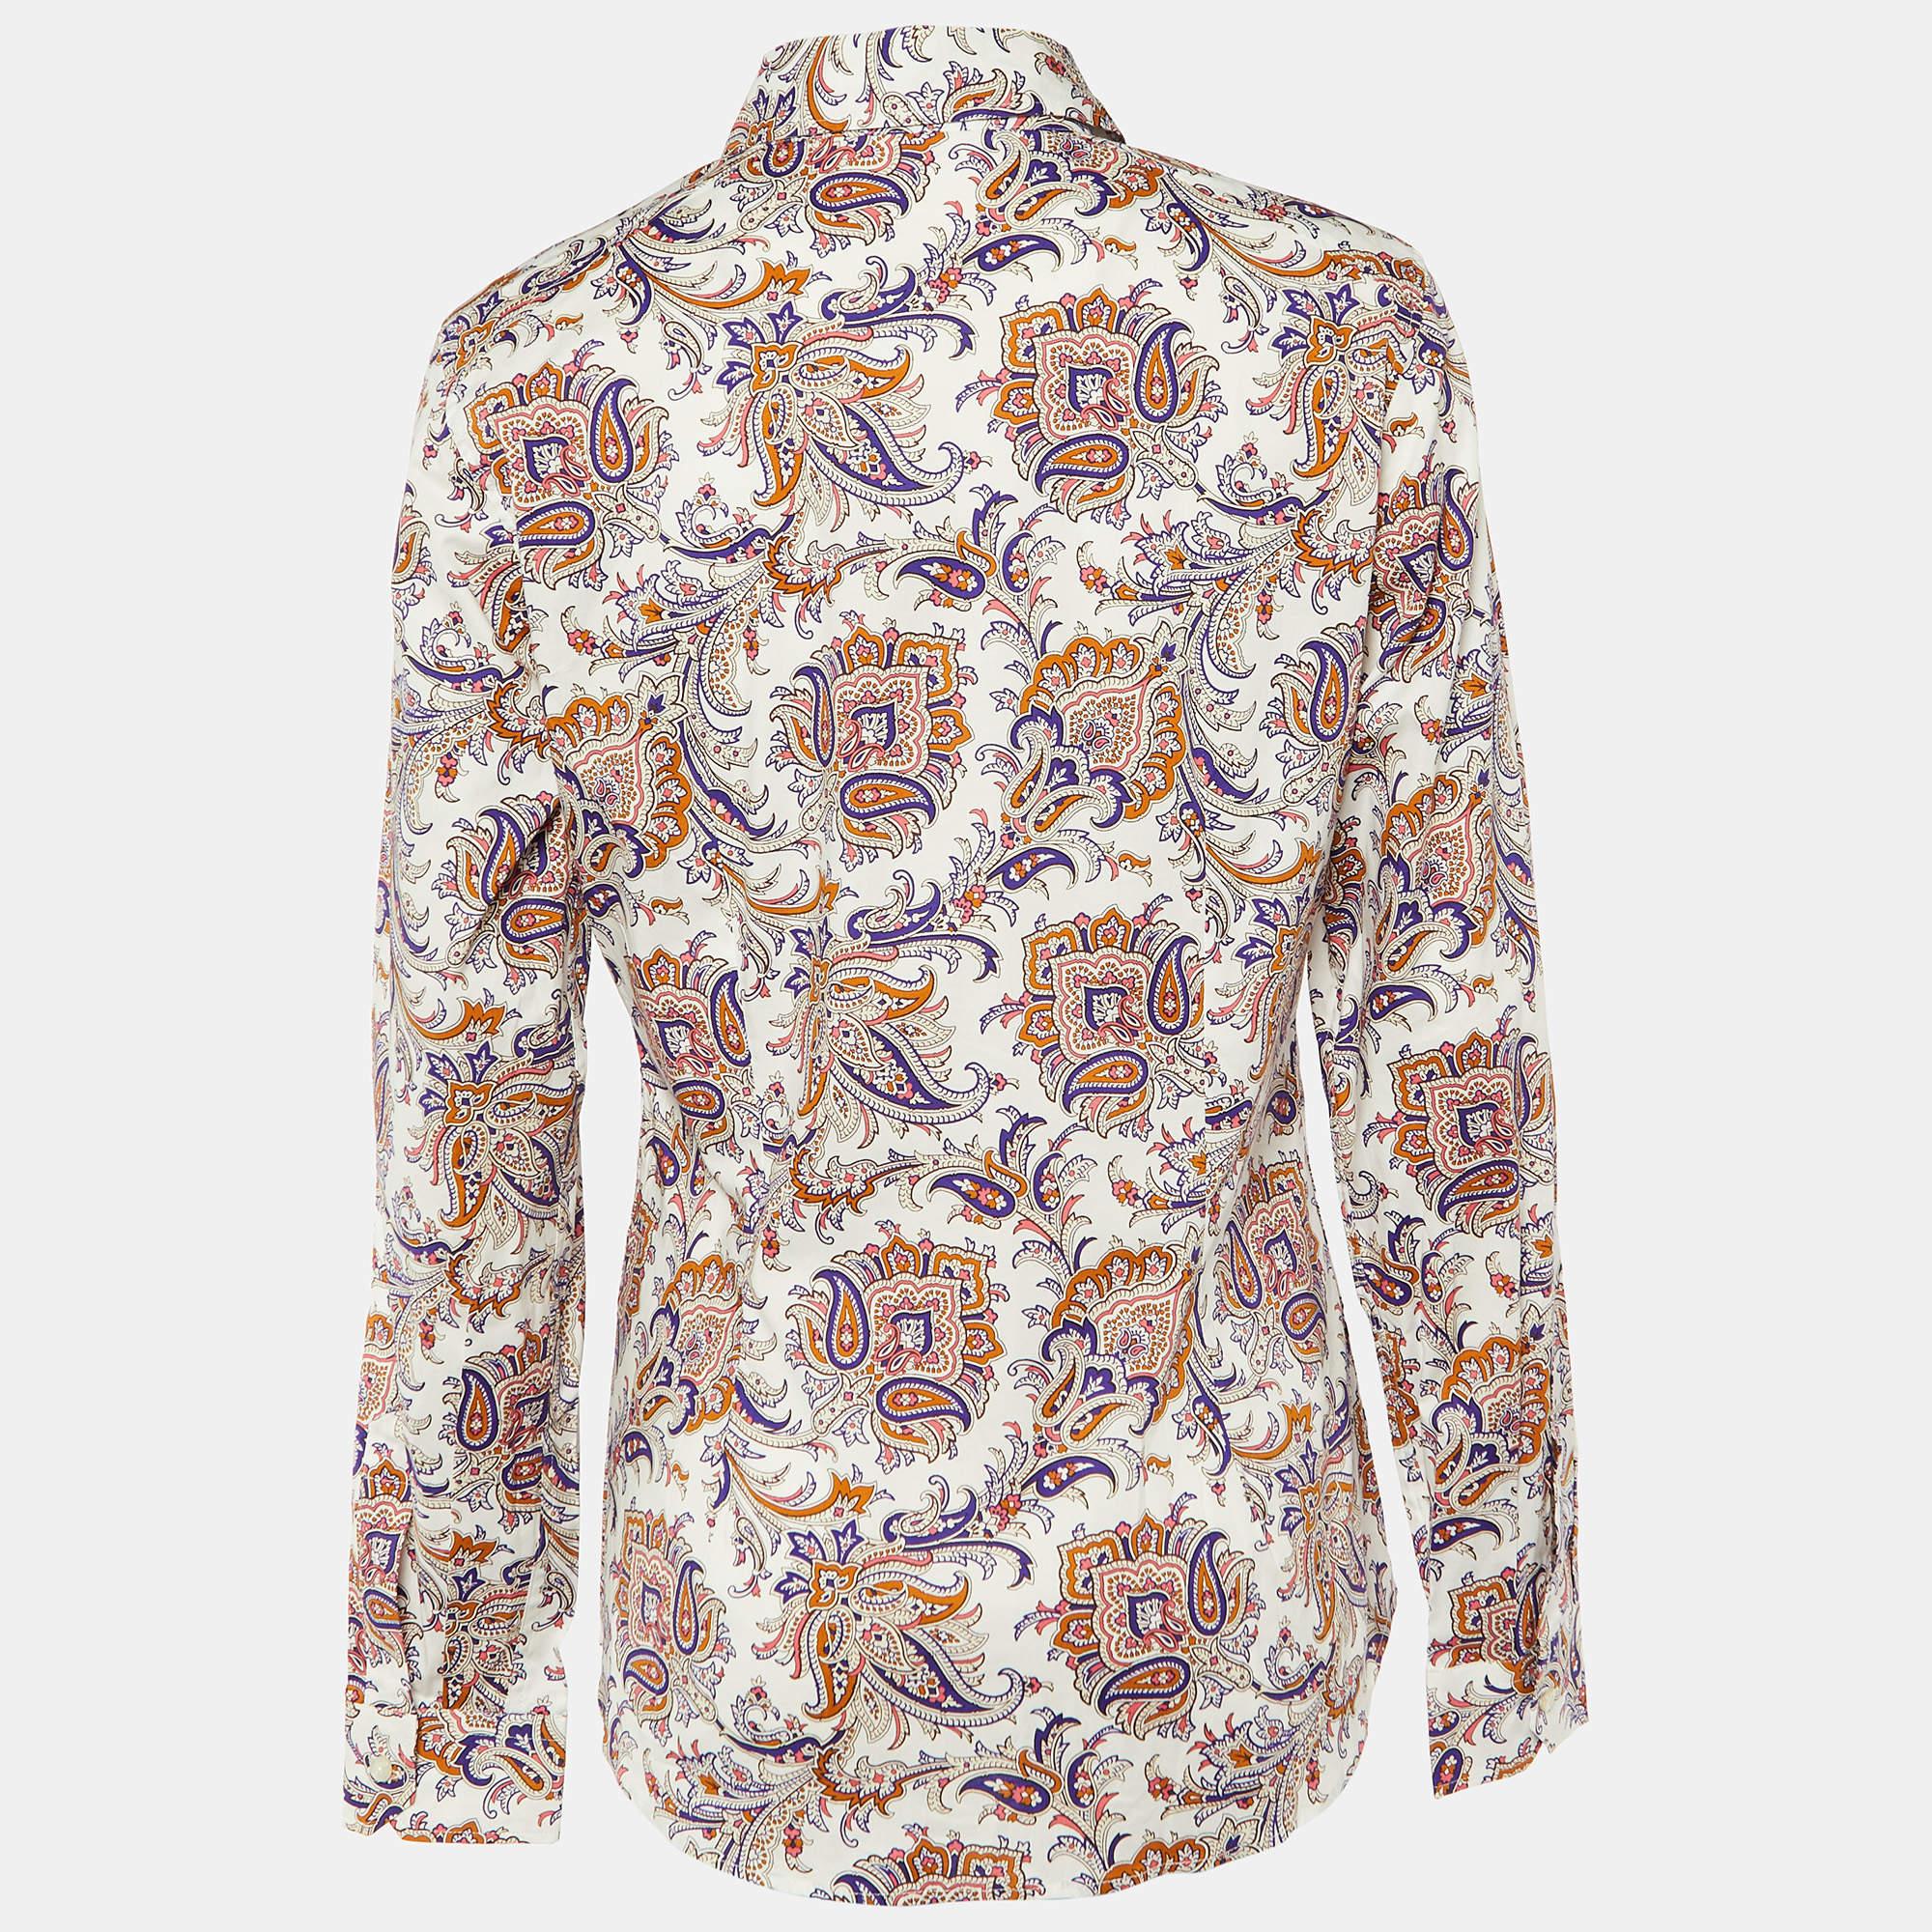 As shirts are an indispensable part of a wardrobe, Etro brings you a creation that is both versatile and stylish. It has been tailored from high-quality fabric for a classy look and fit.

Includes: Brand tag